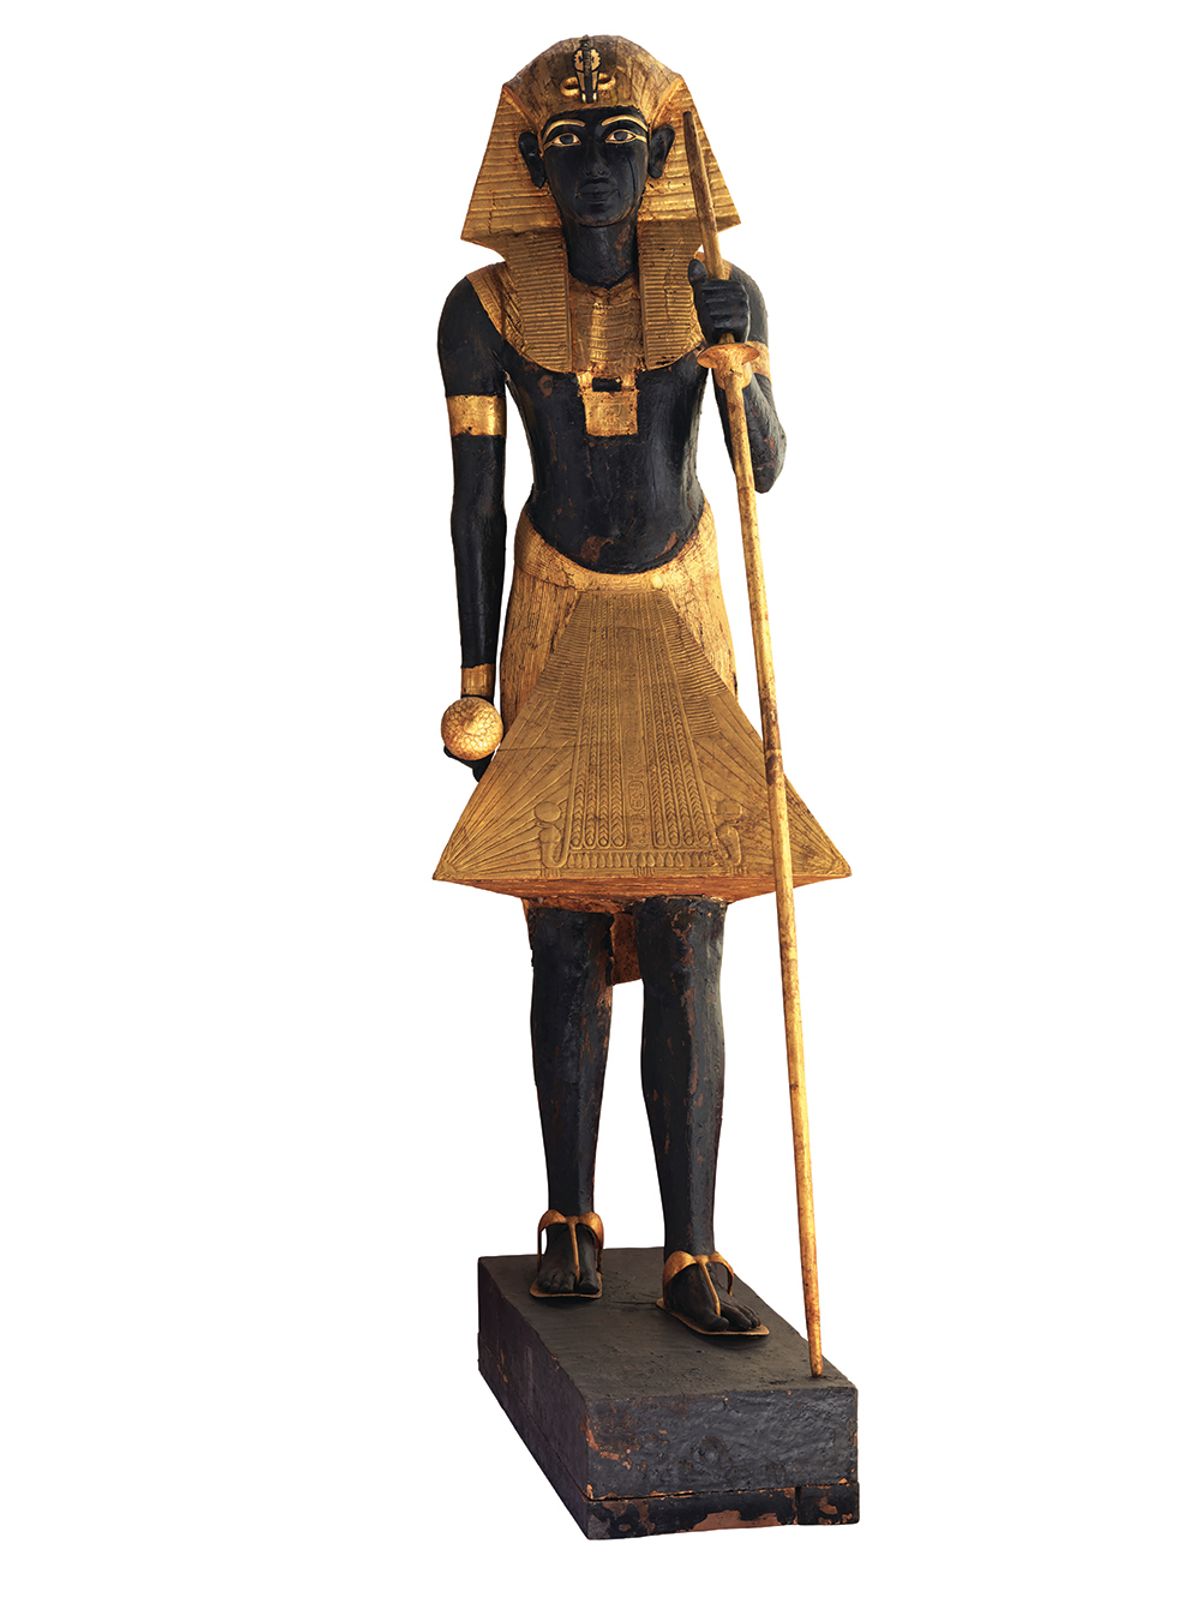 The wooden Guardian Statue of the King (1336-1326BC) is one of the key artefacts in the exhibition ©Laboratoriorosso